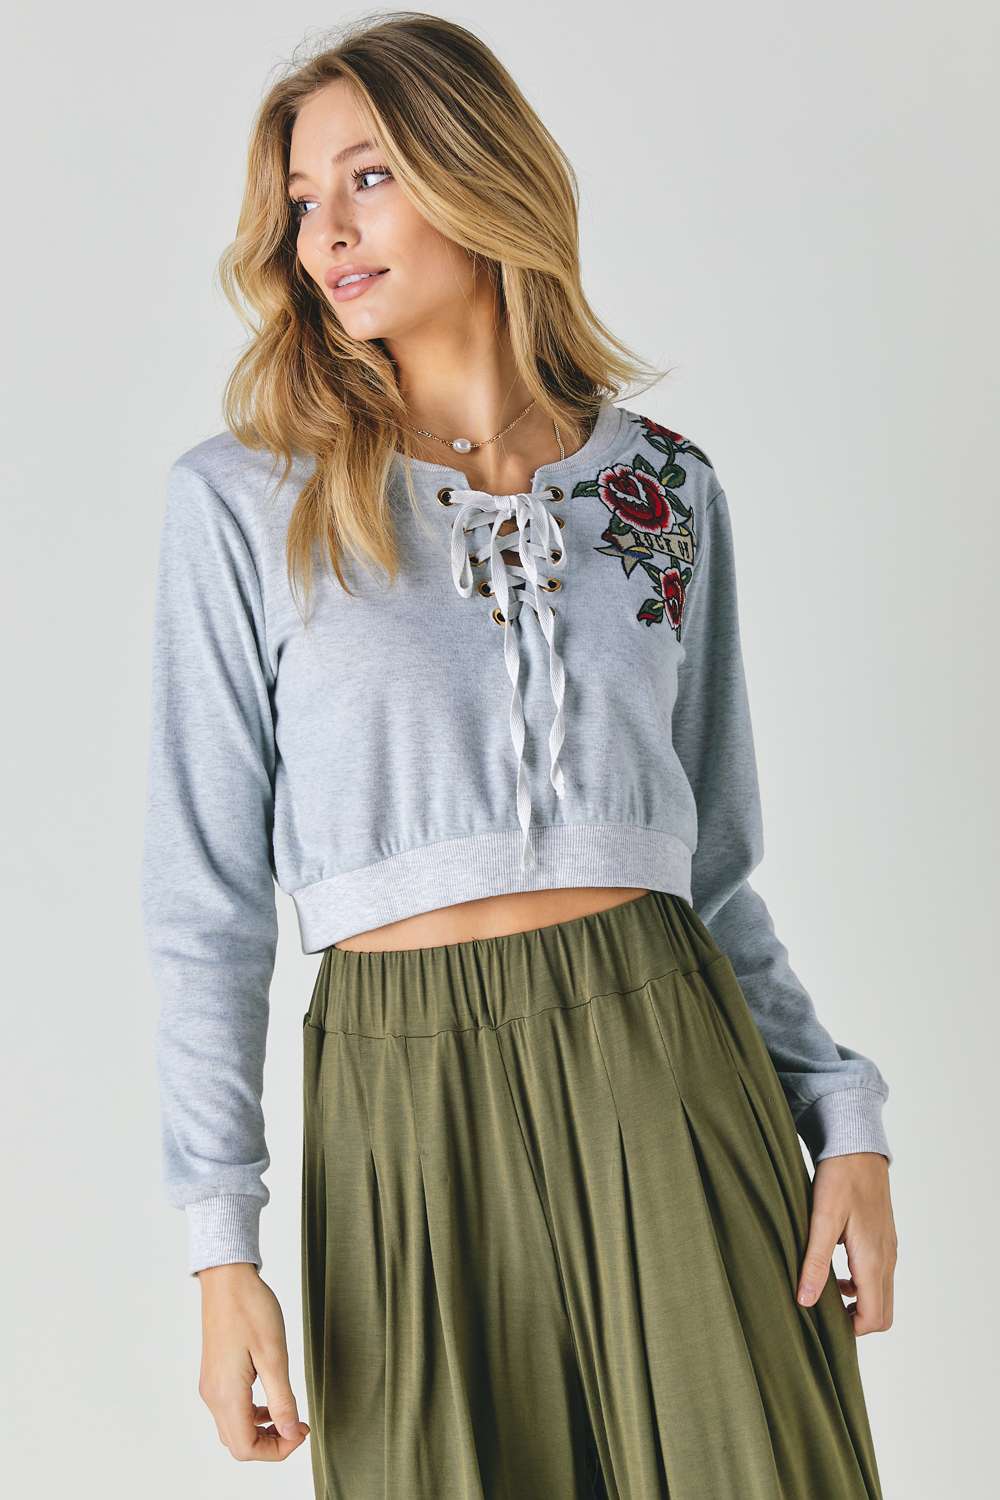 Grey Floral Embroidered Cropped Sweatshirt